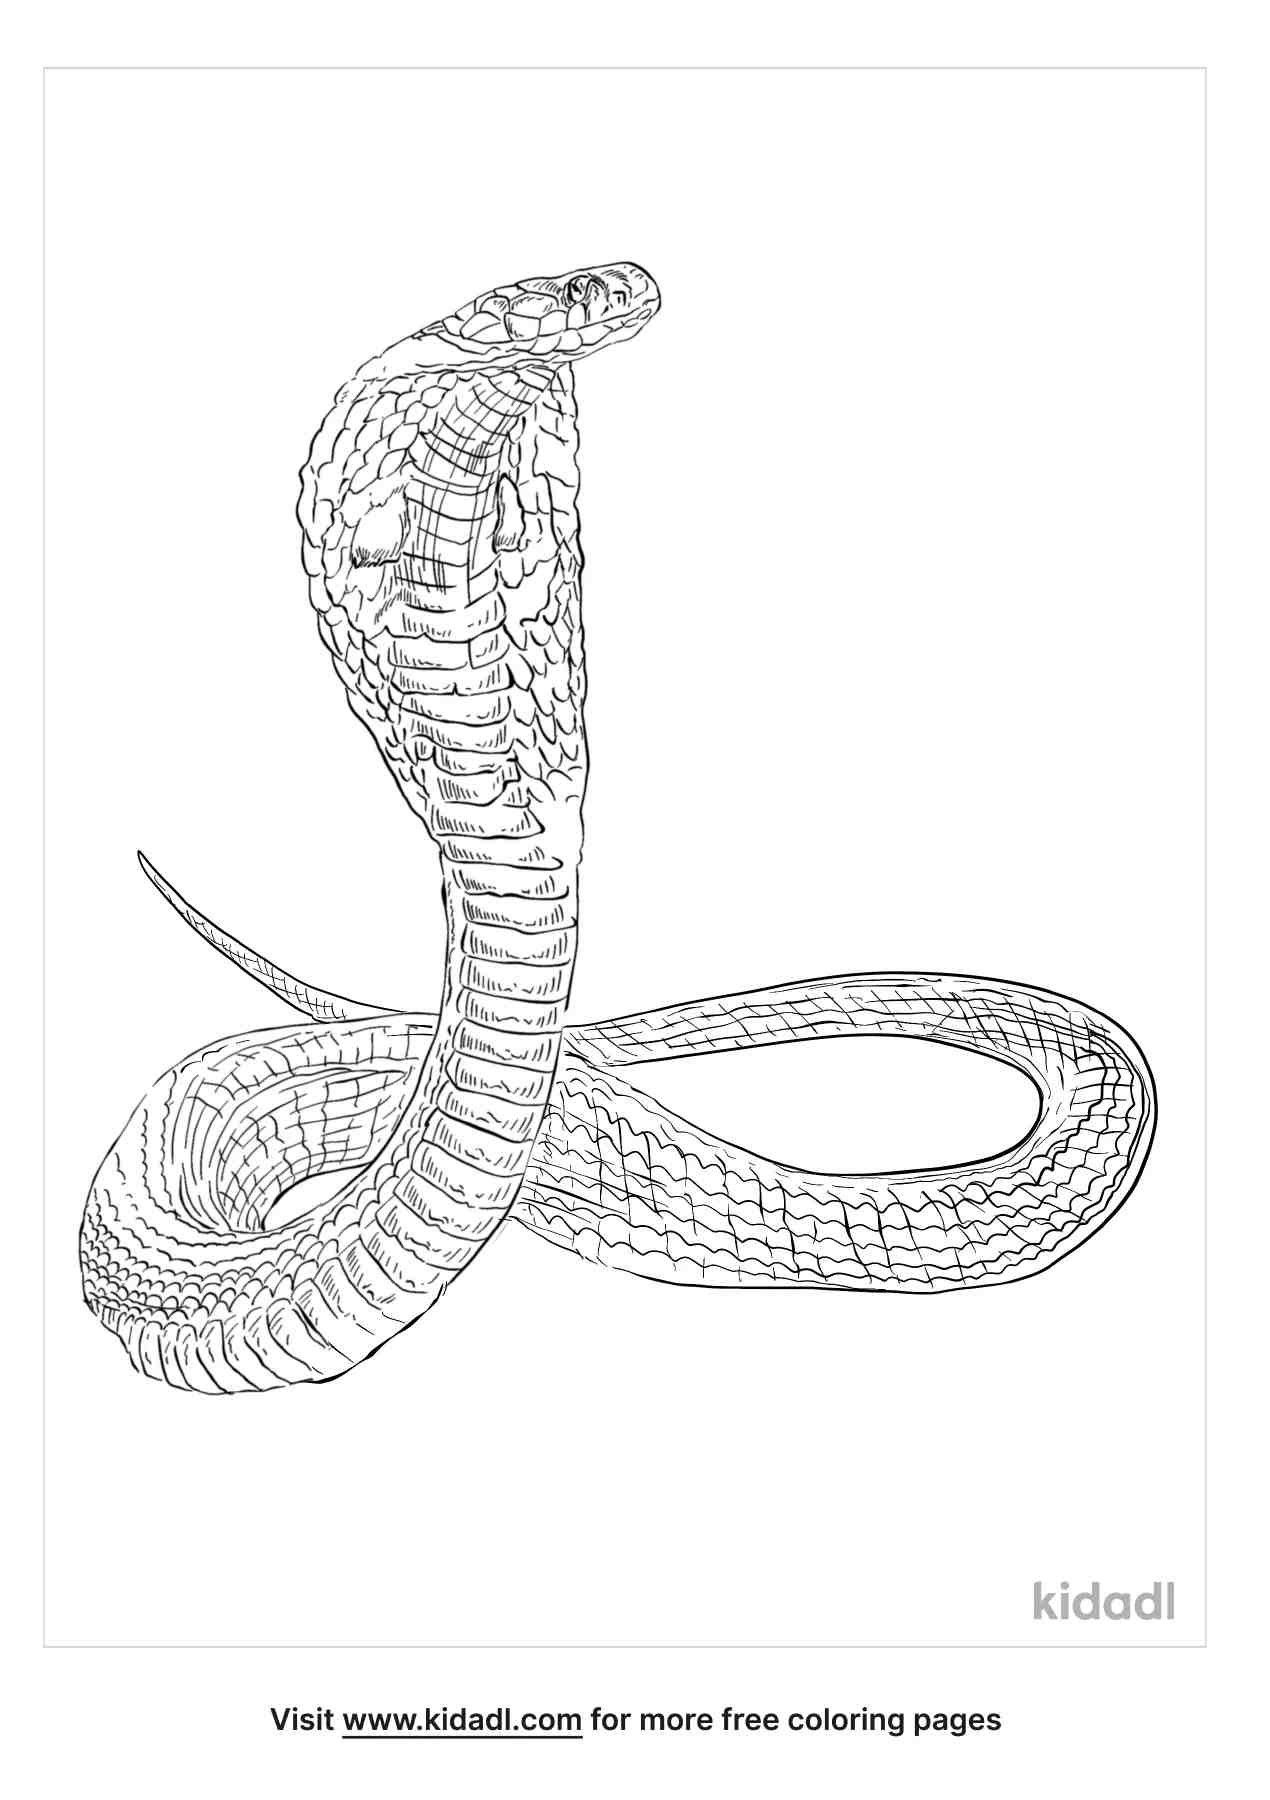 Amazing sketch of an Indian Cobra.